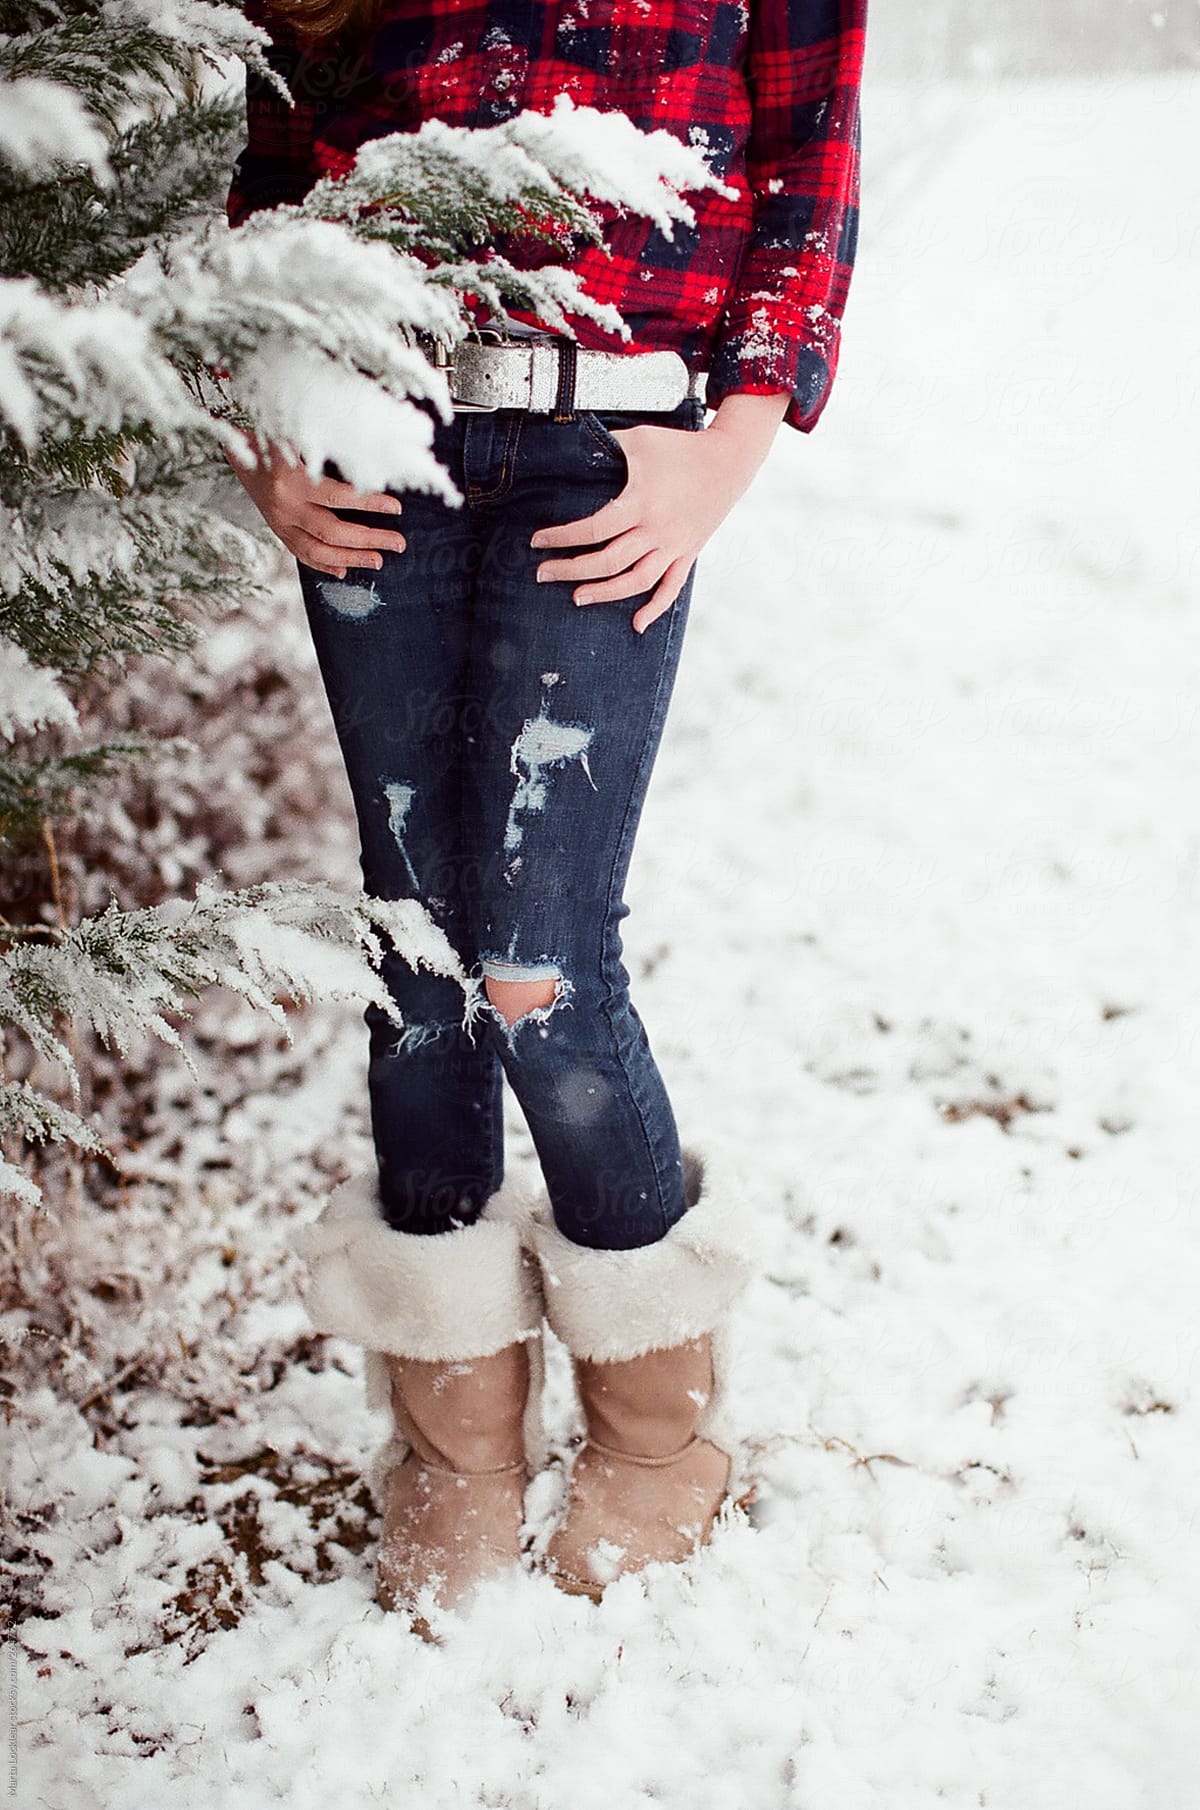 Girl in red and blue flannel shirt dancing and playing in the falling snow.